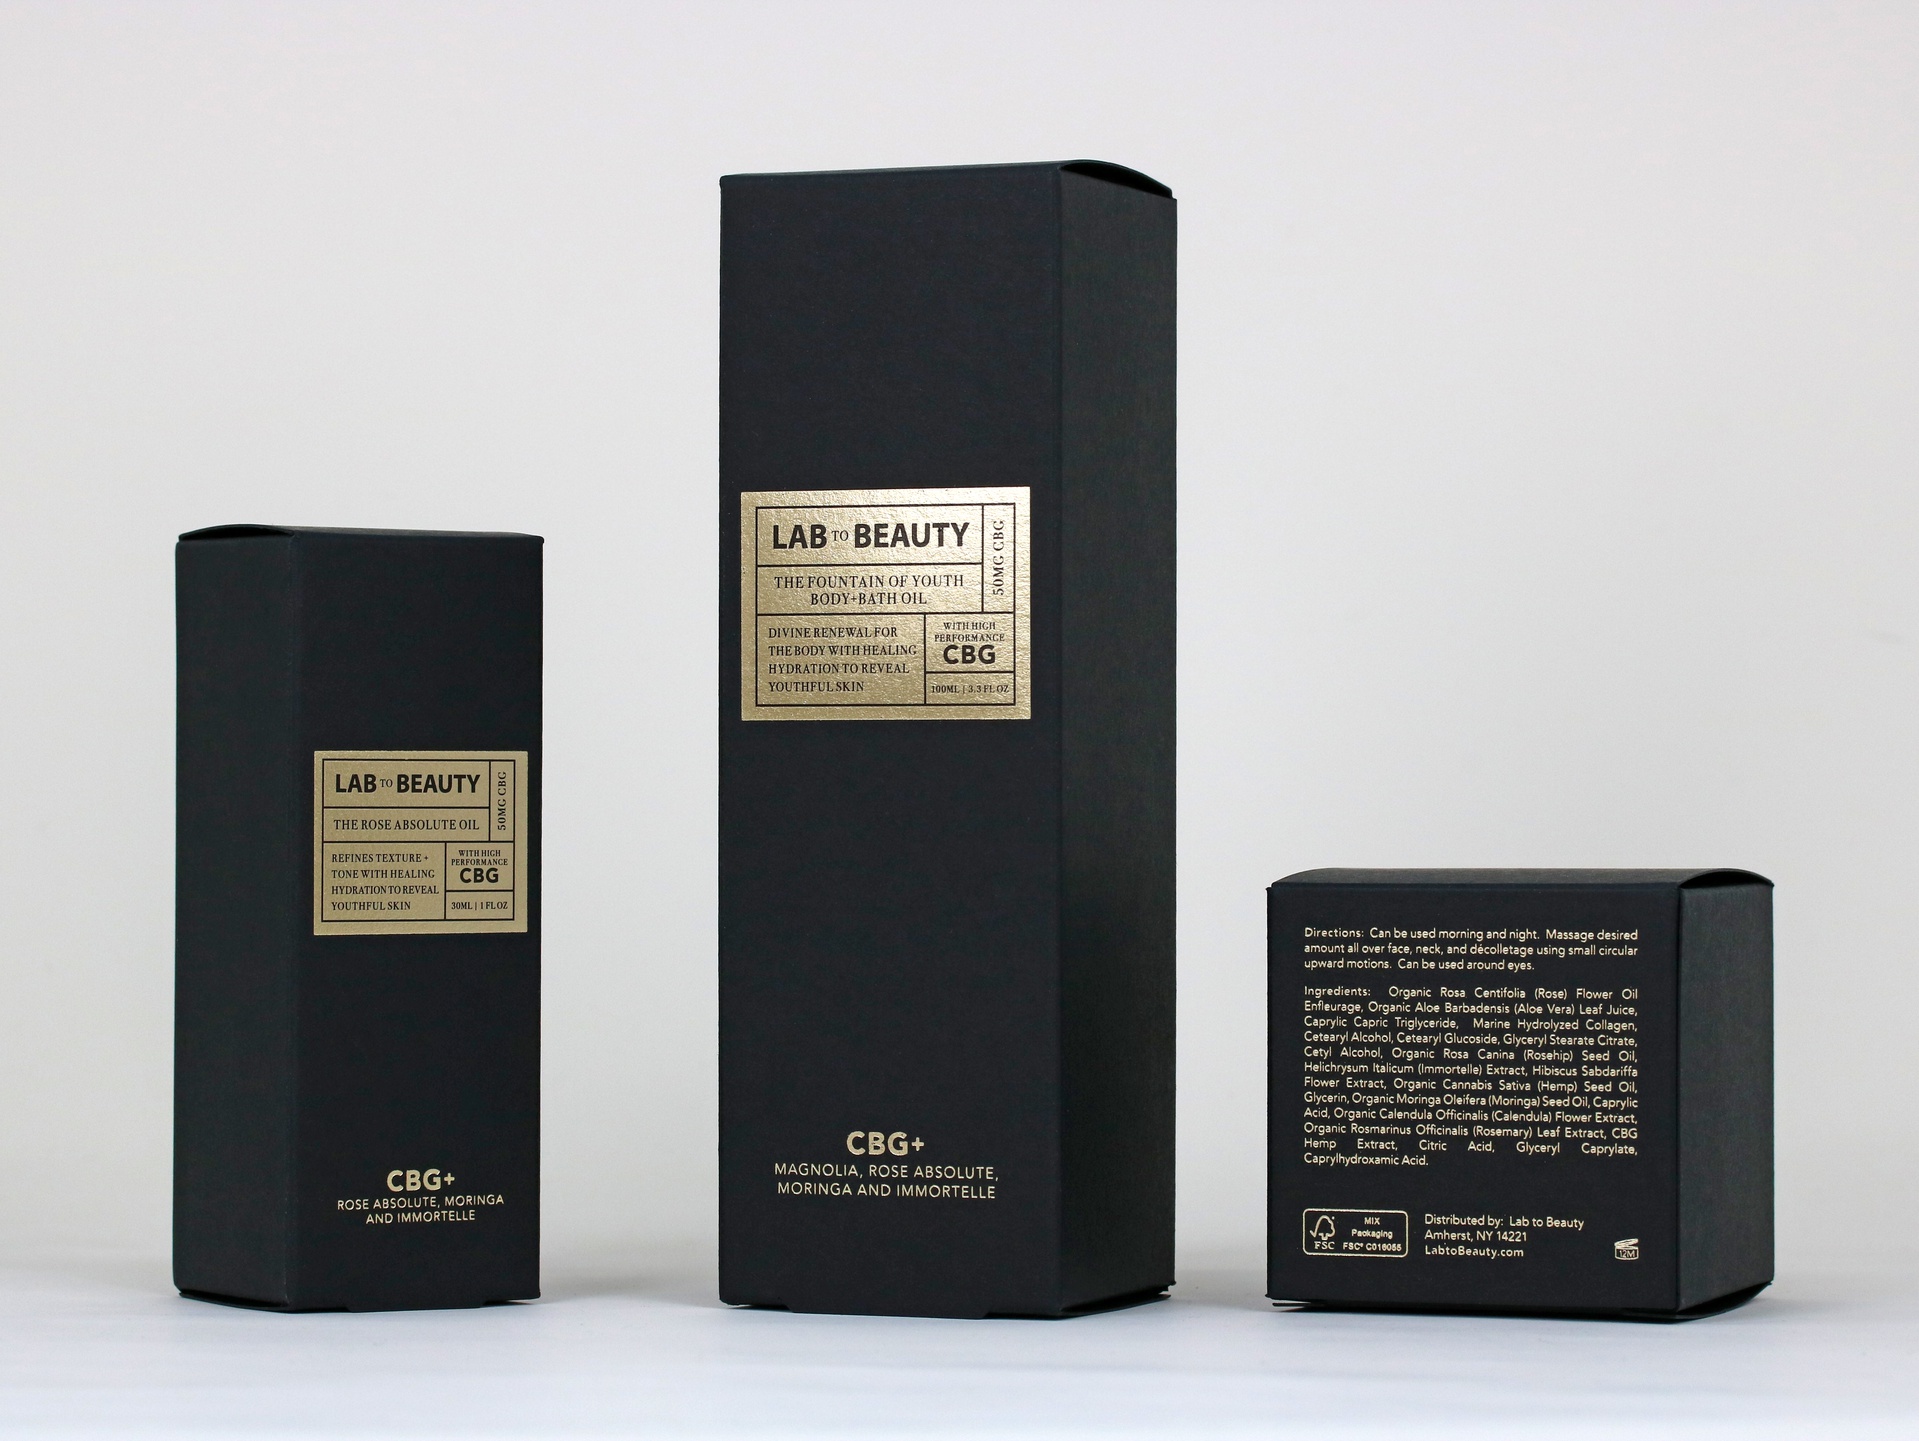 The Fountain of Youth Body + Bath Oil CBG packaging